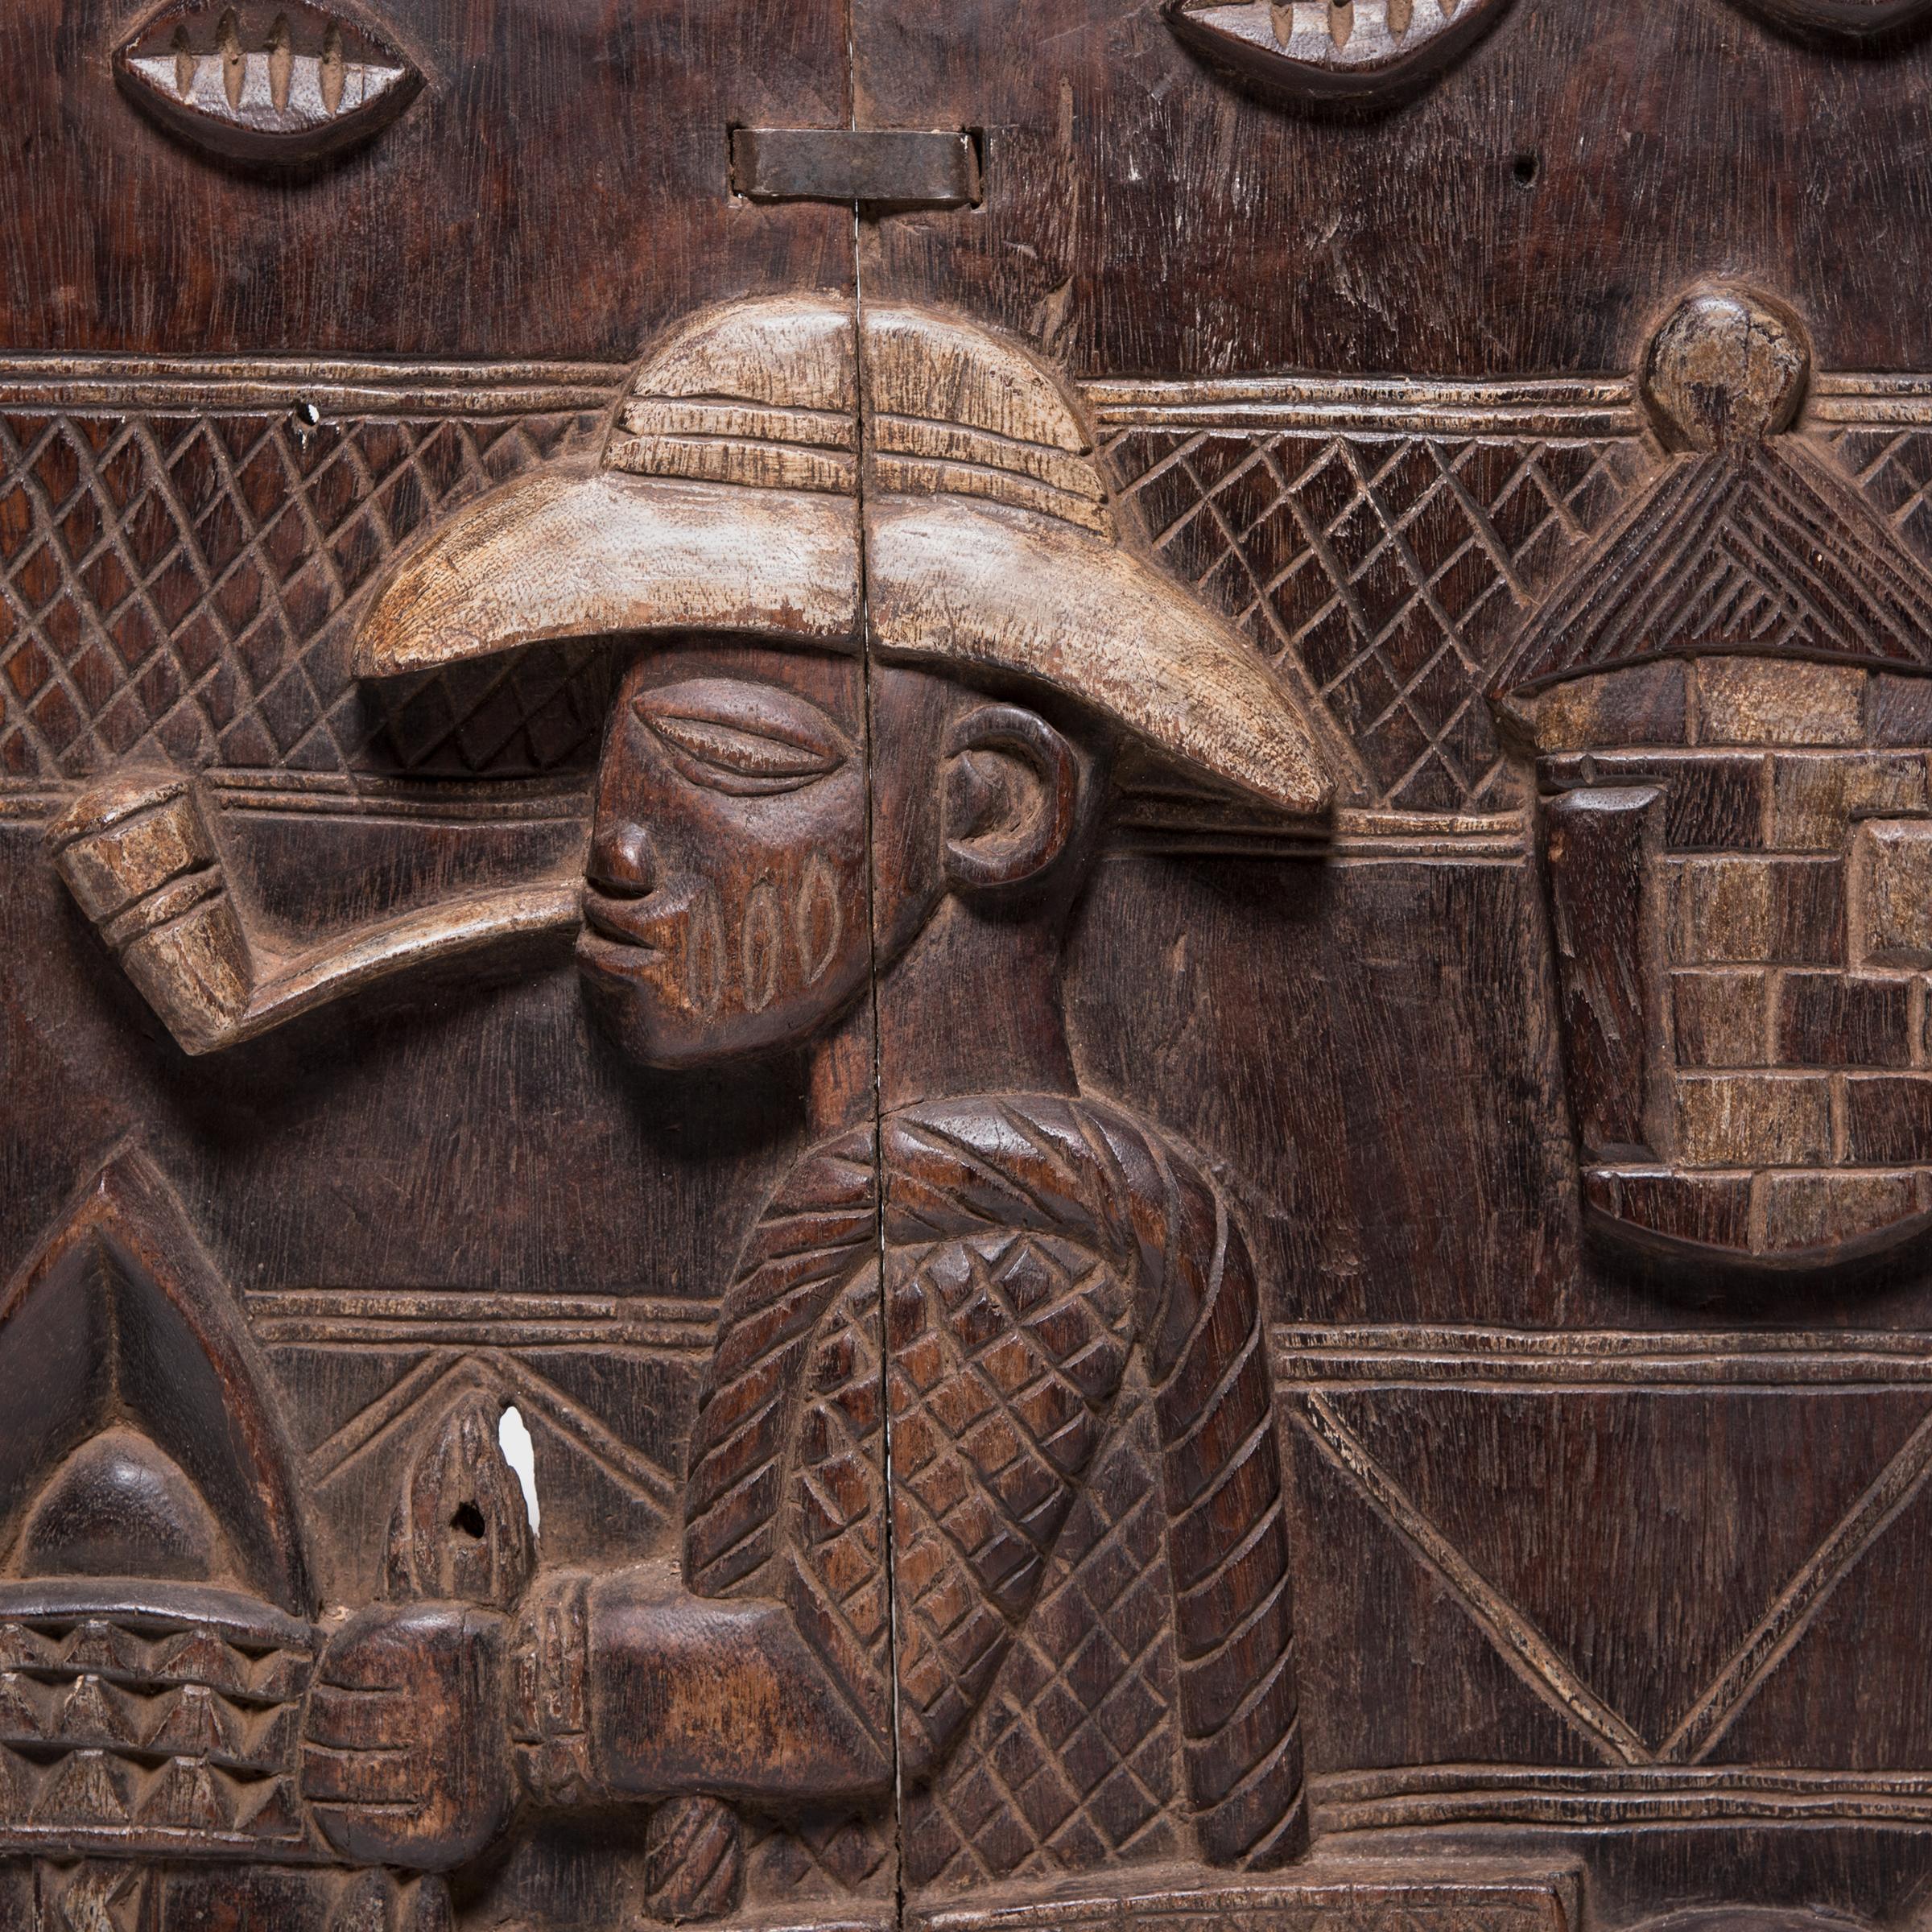 This decorative wooden panel was carved in high relief by a Yoruba artisan as an entry door to a prestigious home or palace.

Known as ilekun, such doors are typically created by master carvers and are commissioned by individuals of special